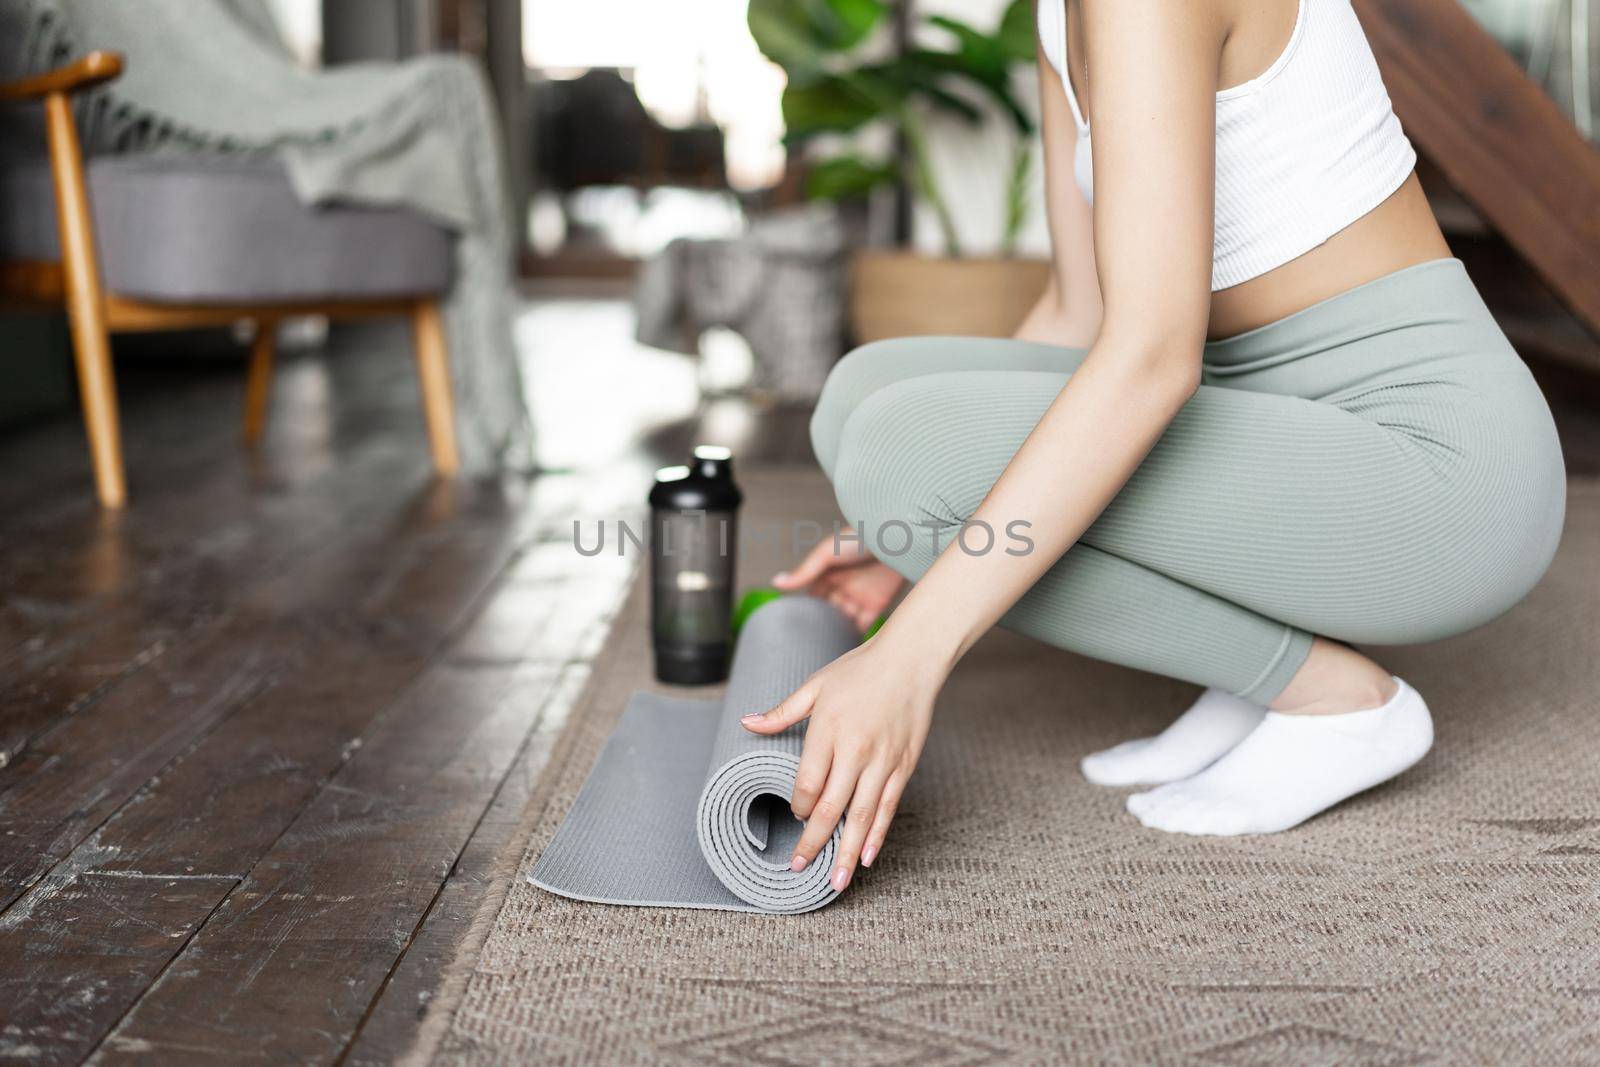 Cropped shot of woman rolling out floor mat for yoga, fitness training at home, girl prepare place for workout at home.